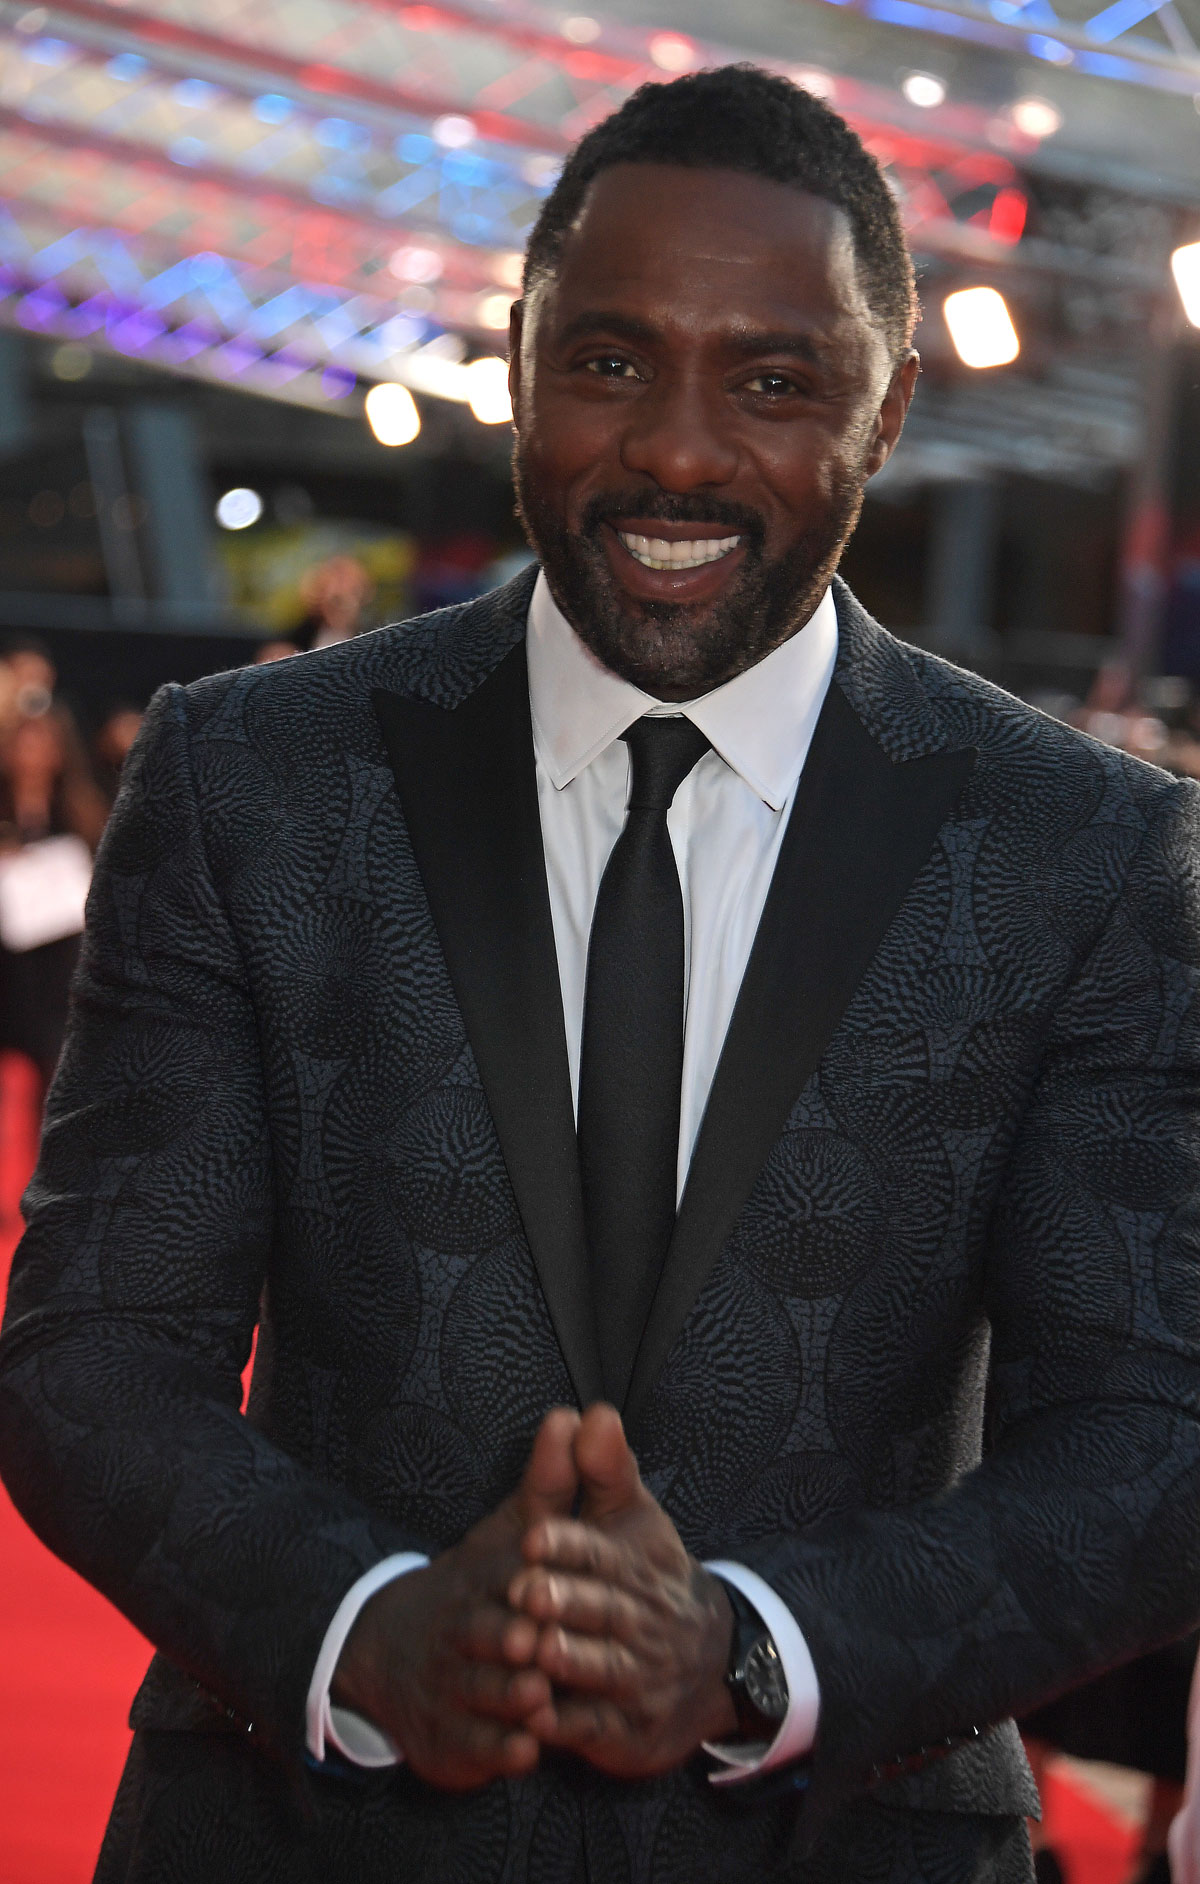 Idris Elba attends the Opening Night Gala for The Harder They Fall during the 65th BFI London Film Festival